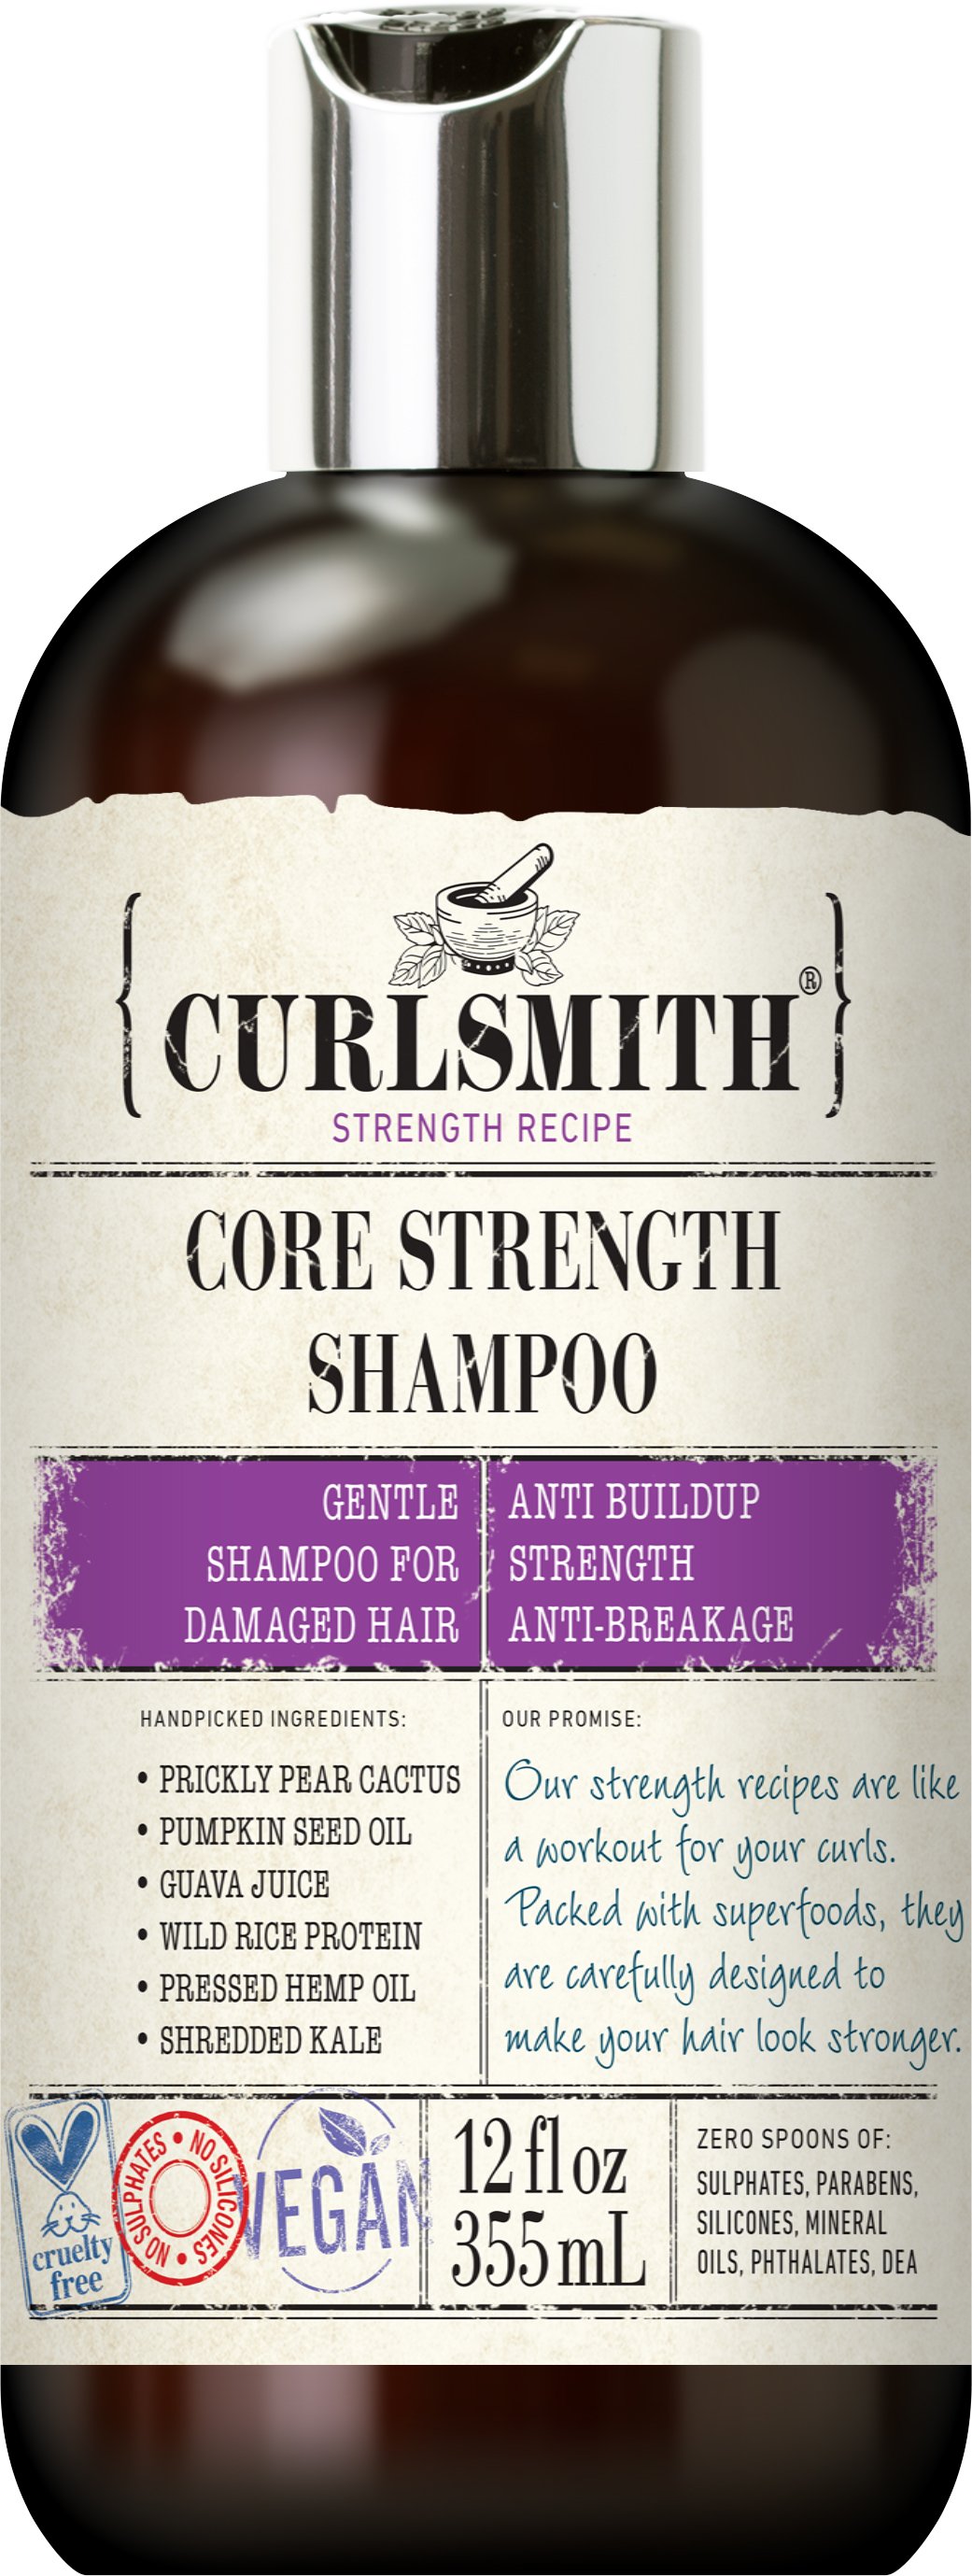 Curlsmith Core Strenght Shampoo